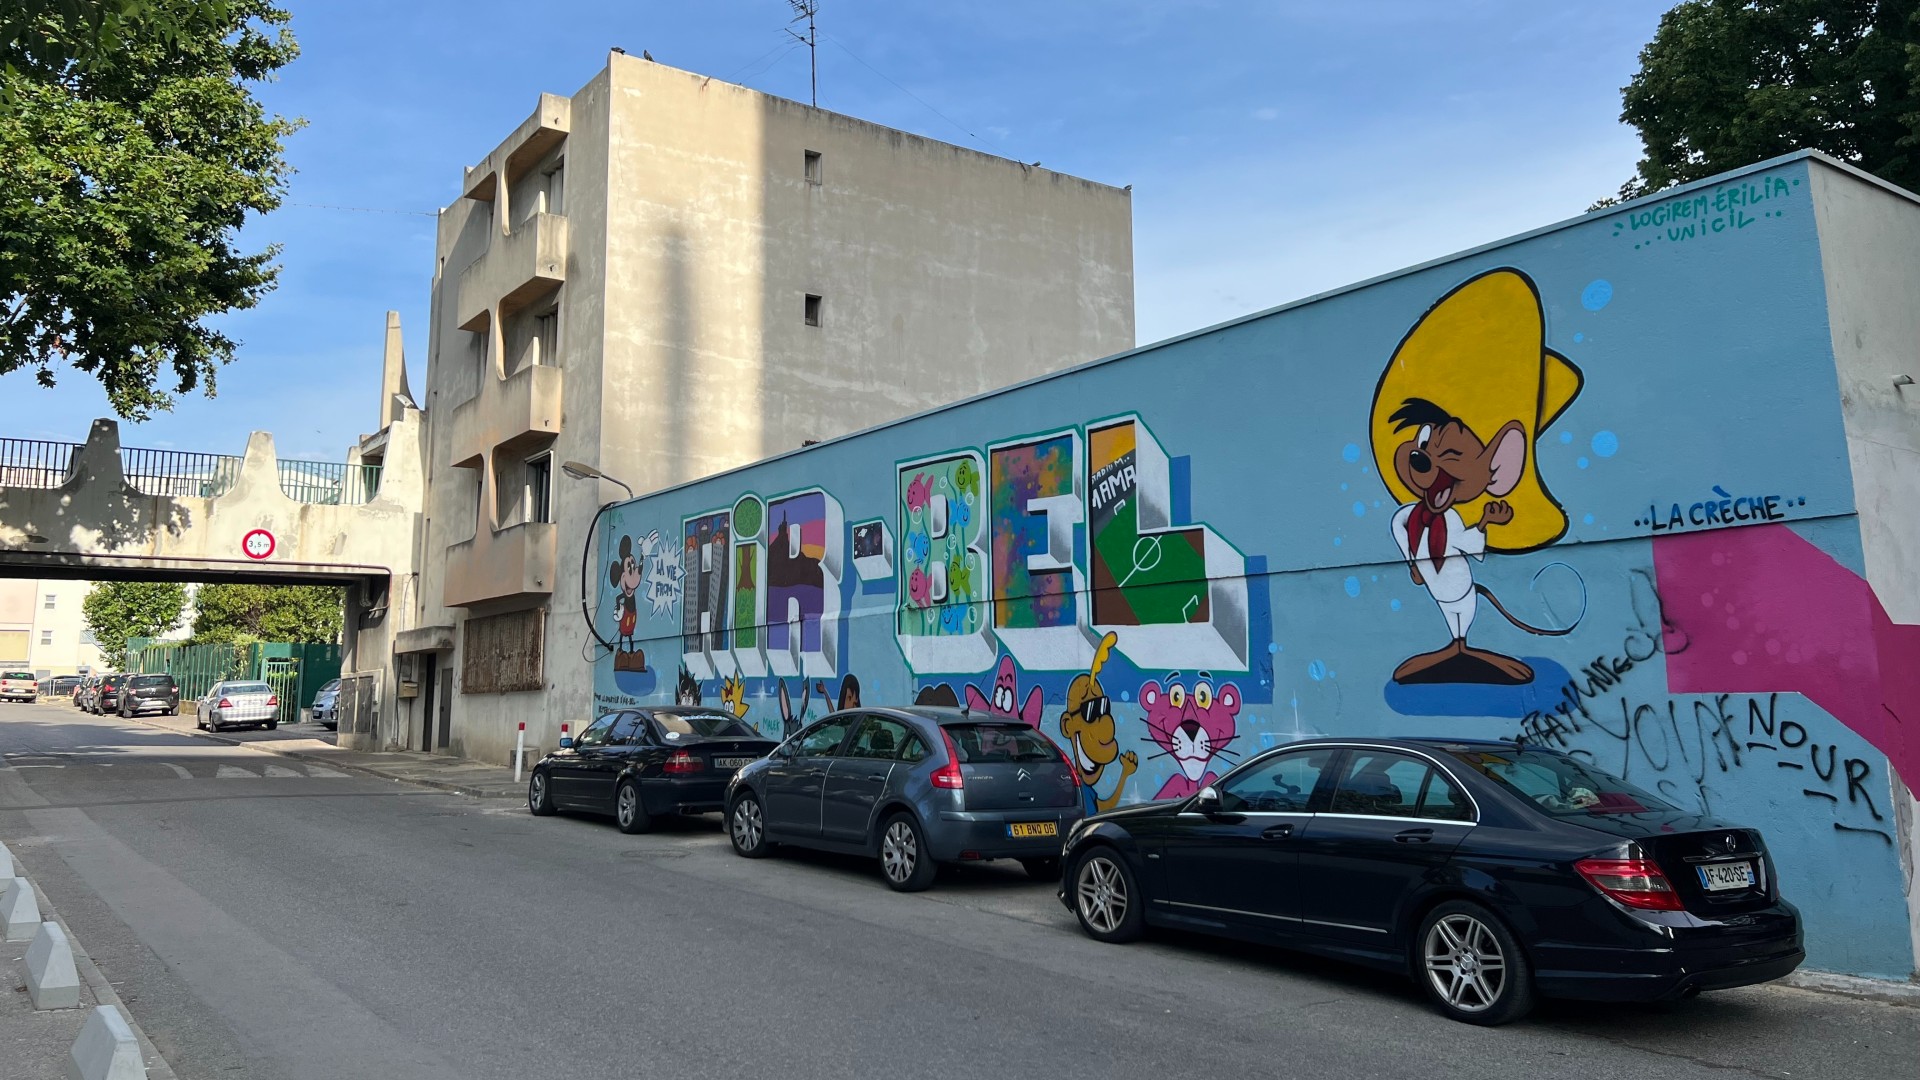 The Air-Bel estate in eastern Marseille, one of the city's poorest areas, was discovered to have Legionella in its water in 2017. Six years on, the problem hasn't been resolved (MEE/Frank Andrews)